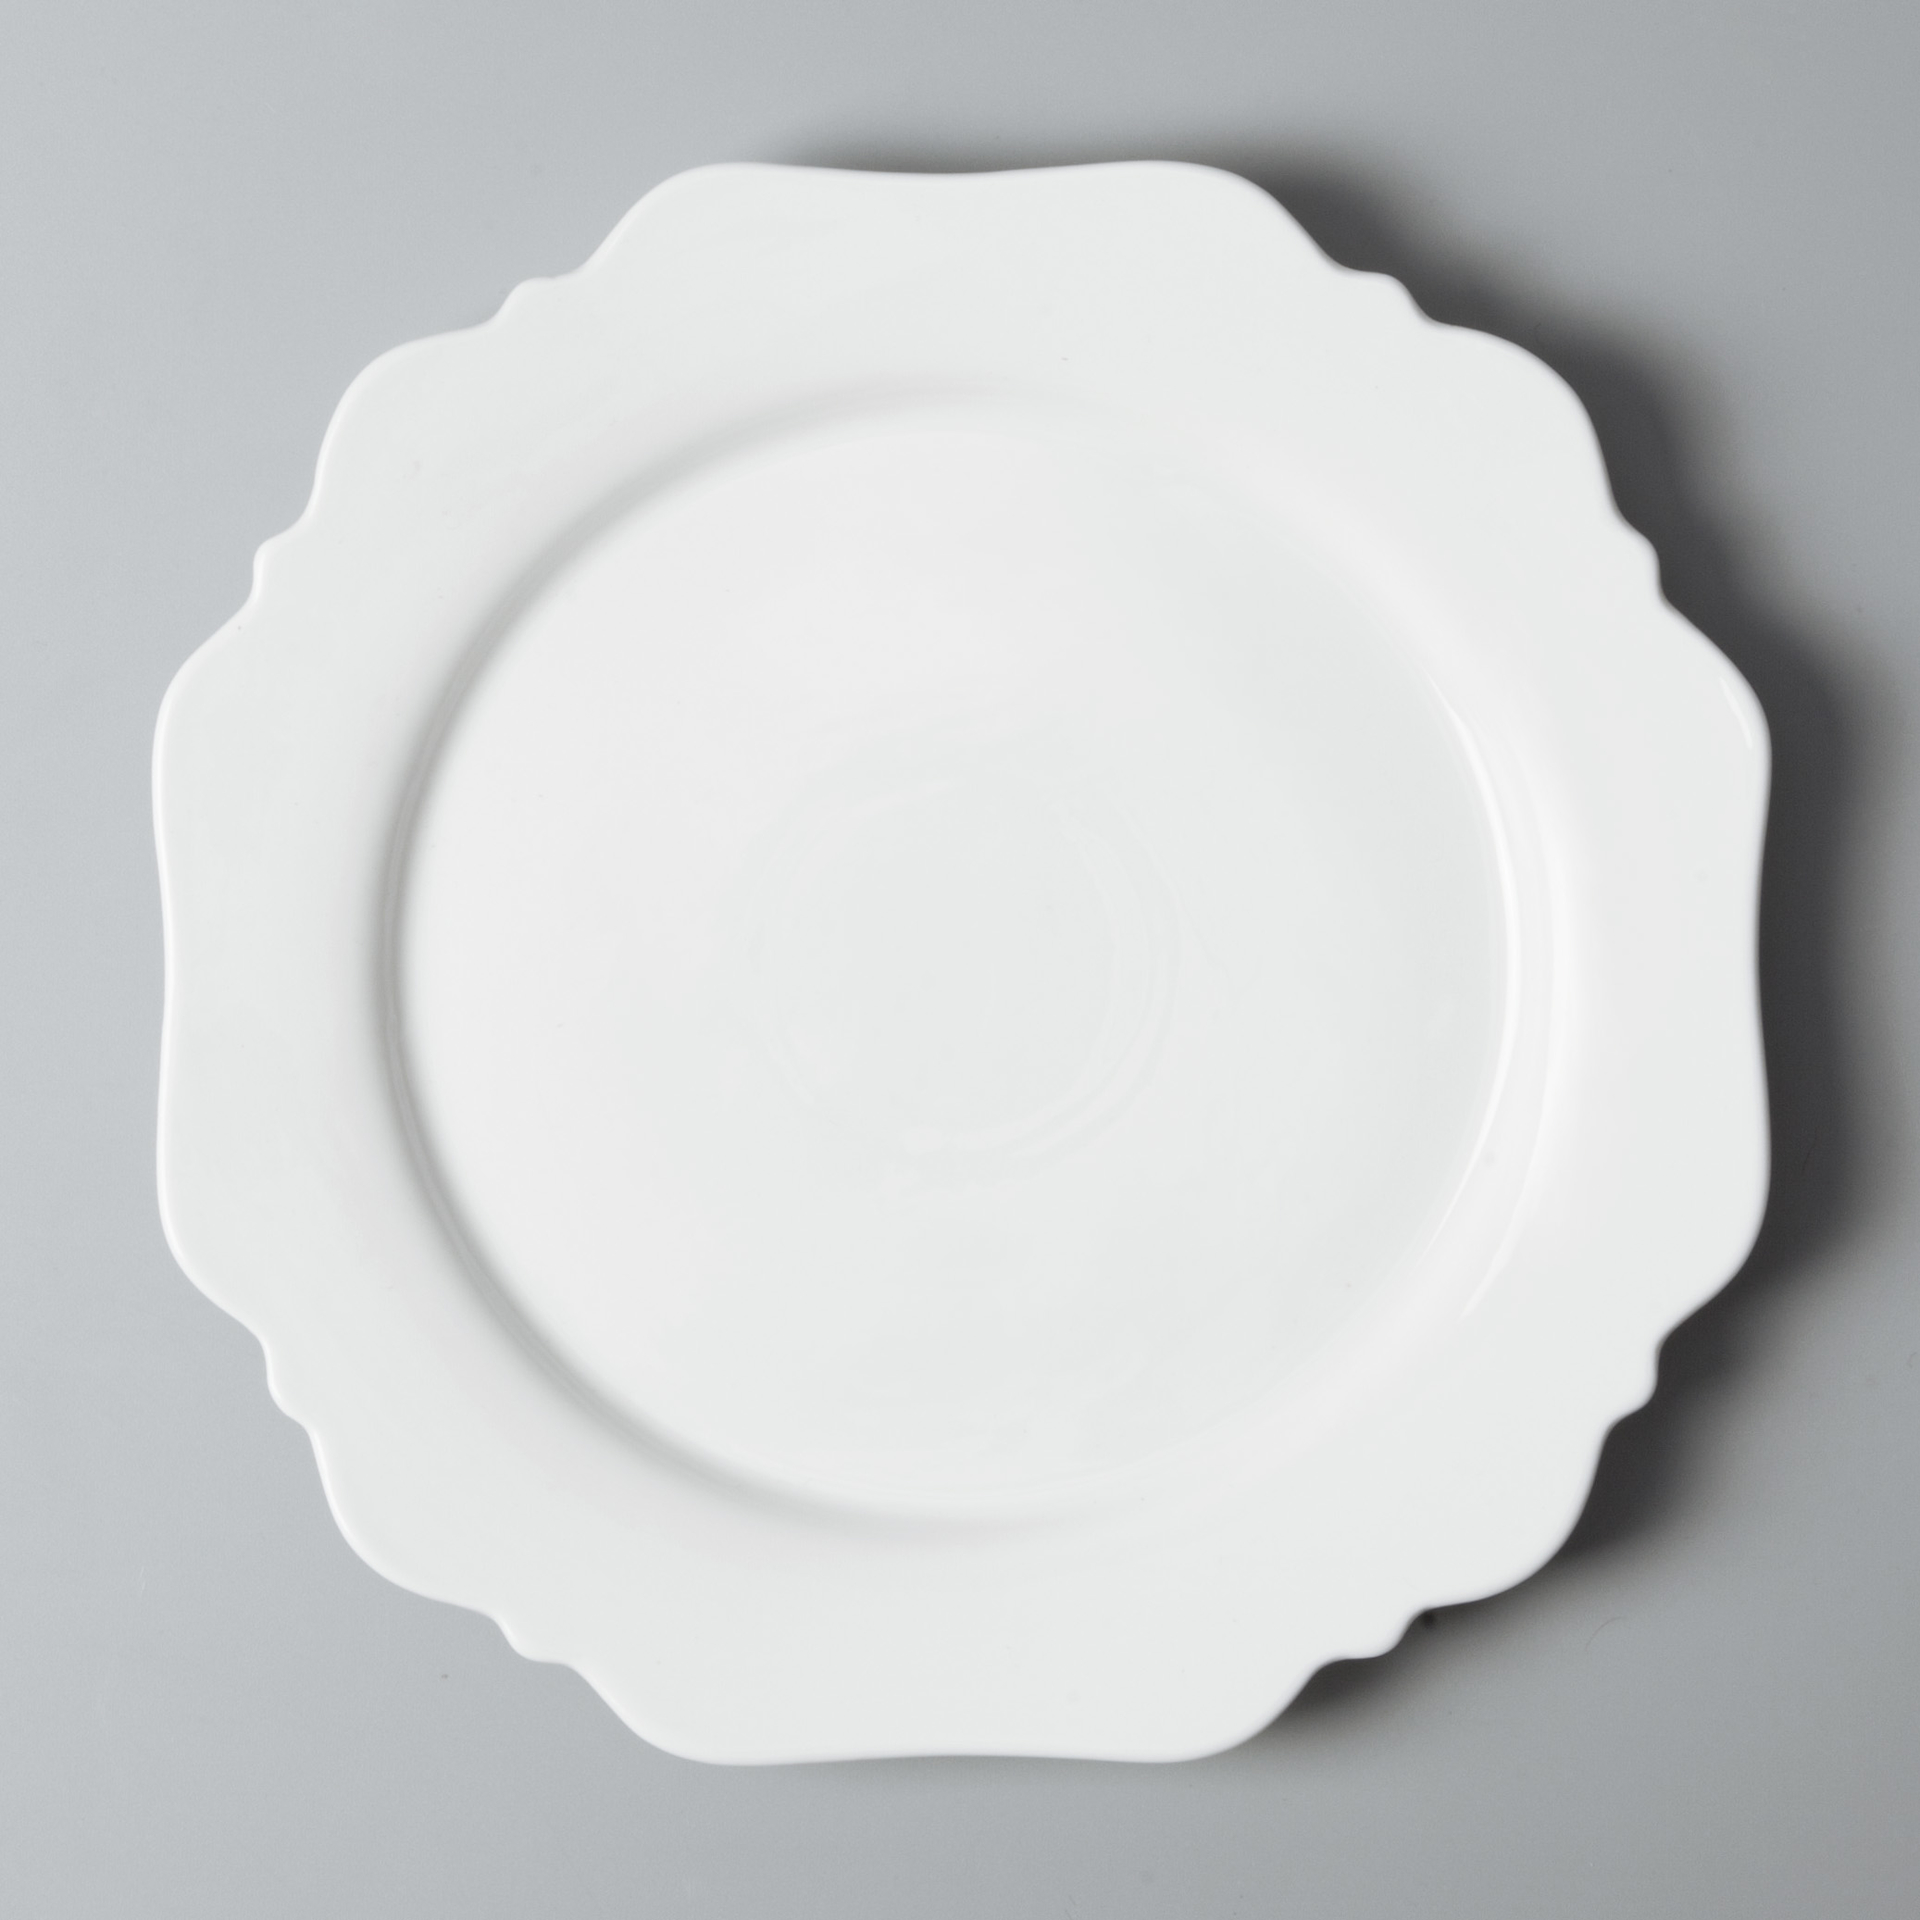 white porcelain tableware bing contemporary Two Eight Brand